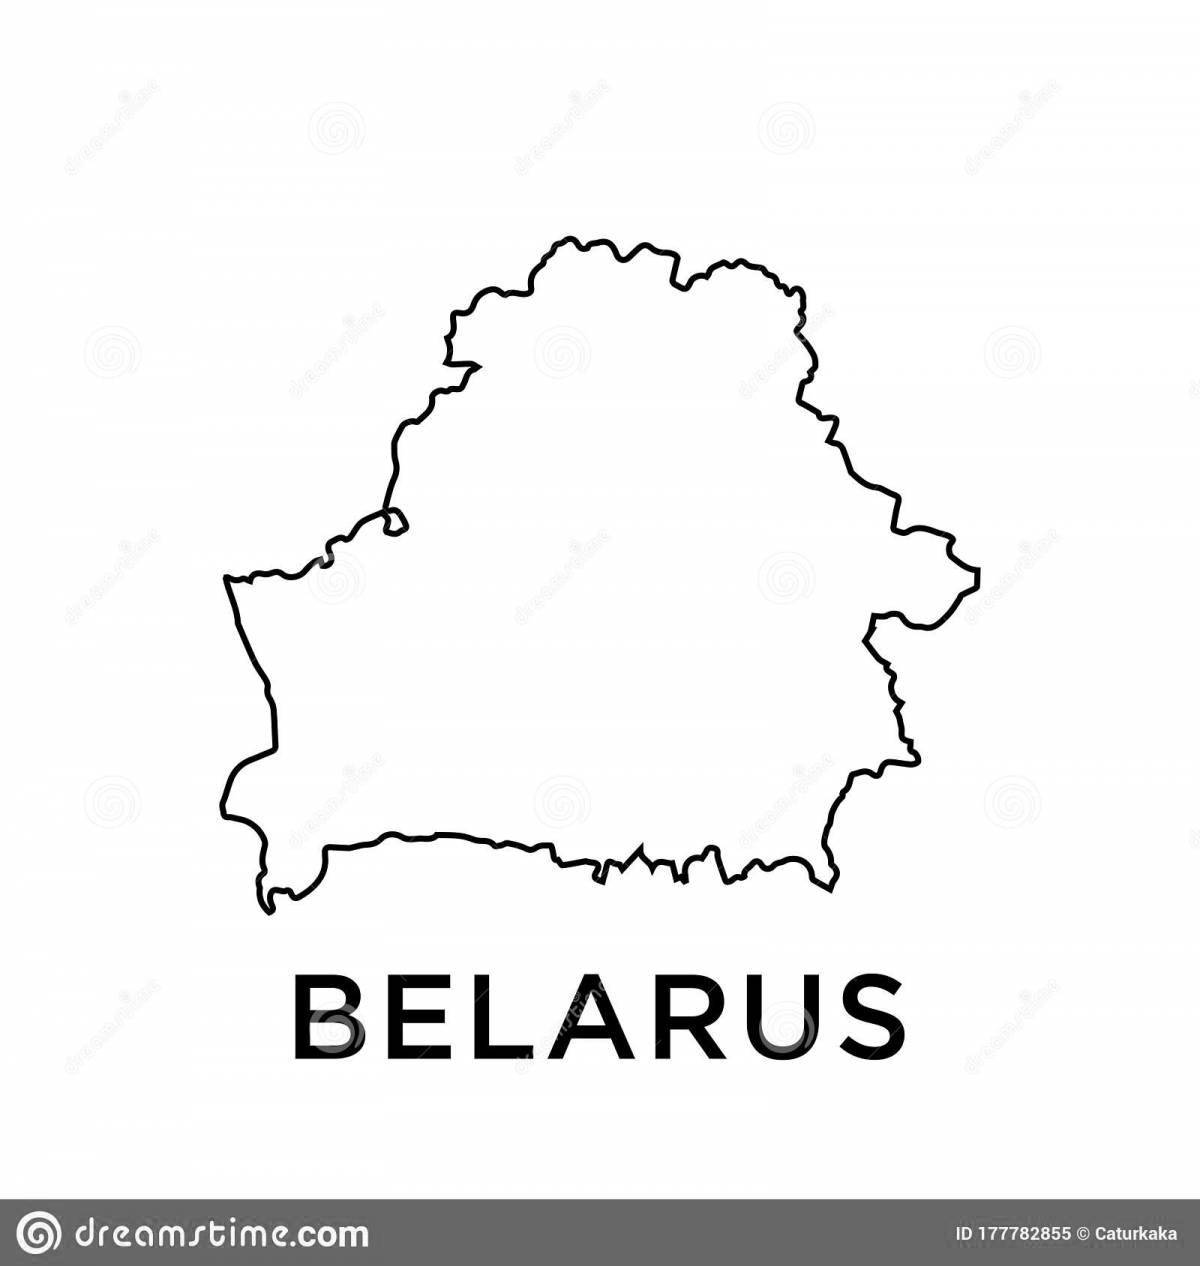 Fun coloring map of belarus for the little ones